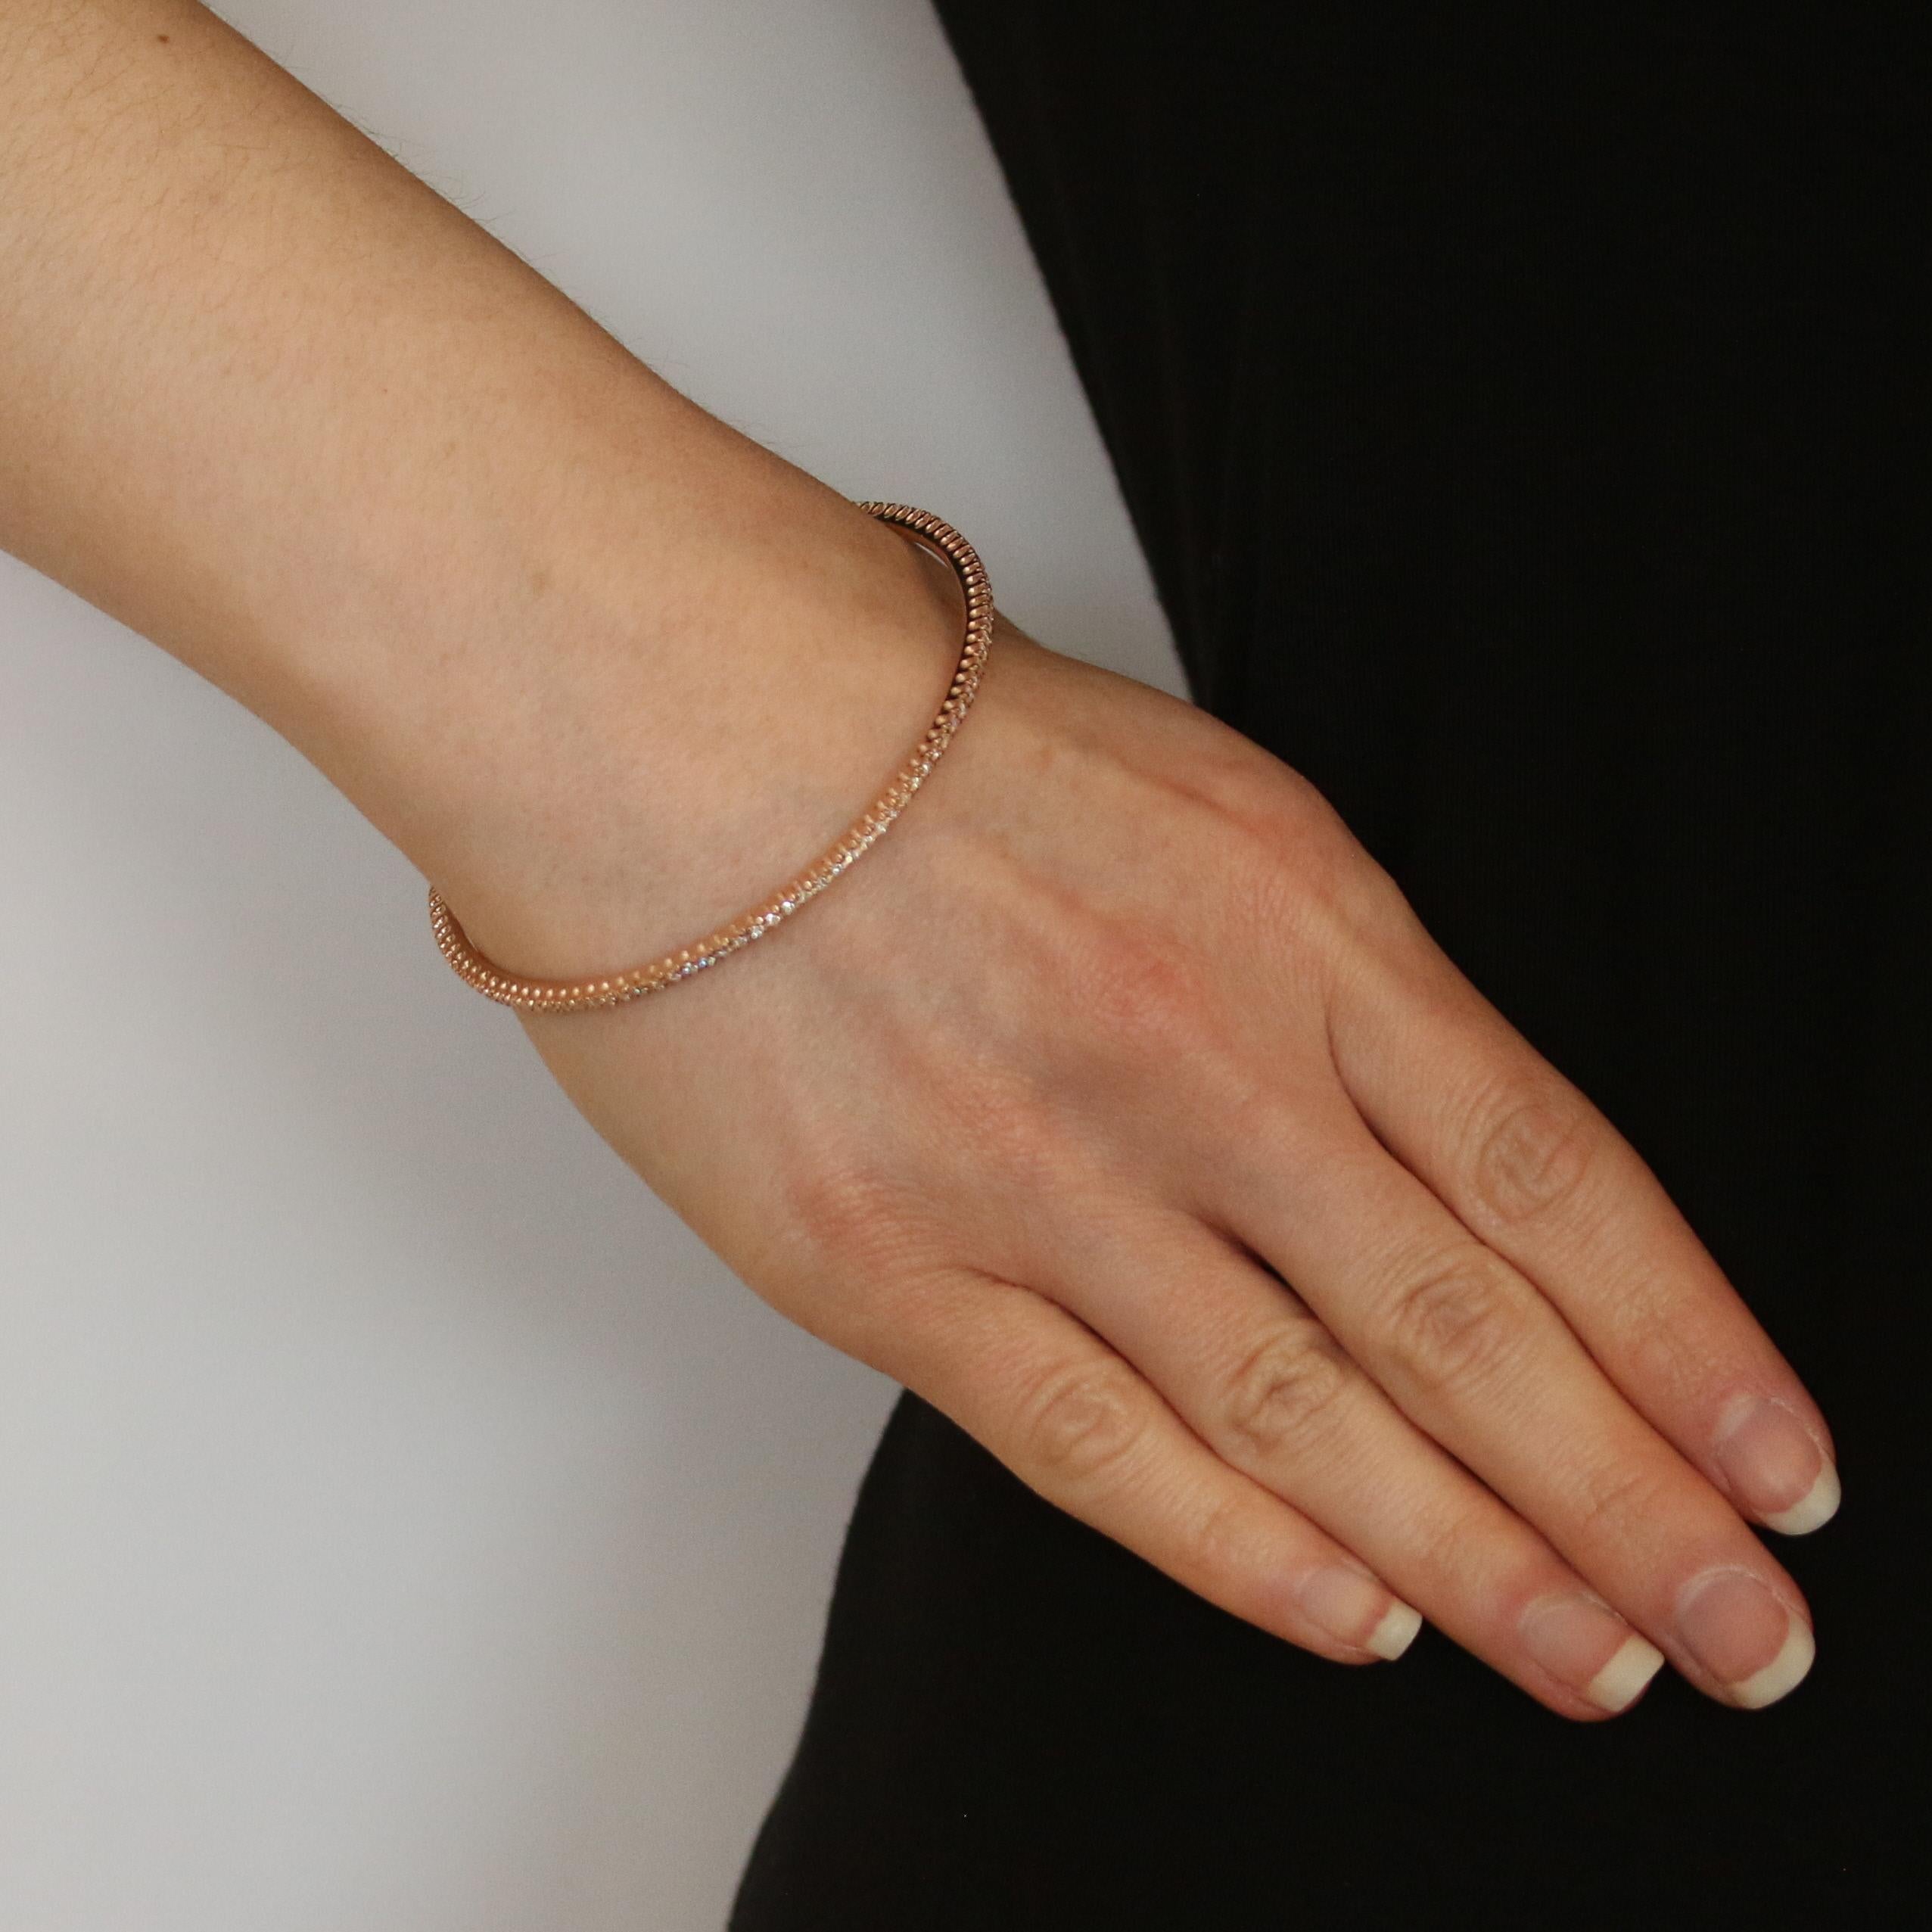 Metal Content: 14k Rose Gold  

Stone Information: 
Natural Diamonds
Total Carats: 1.05ctw
Cut: Round Brilliant 
Color: G - H   
Clarity: SI1 - SI2 

Bracelet Style: Stackable Bangle 
Closure Type: N/A (slides over wrist)

Measurements: 
Inner